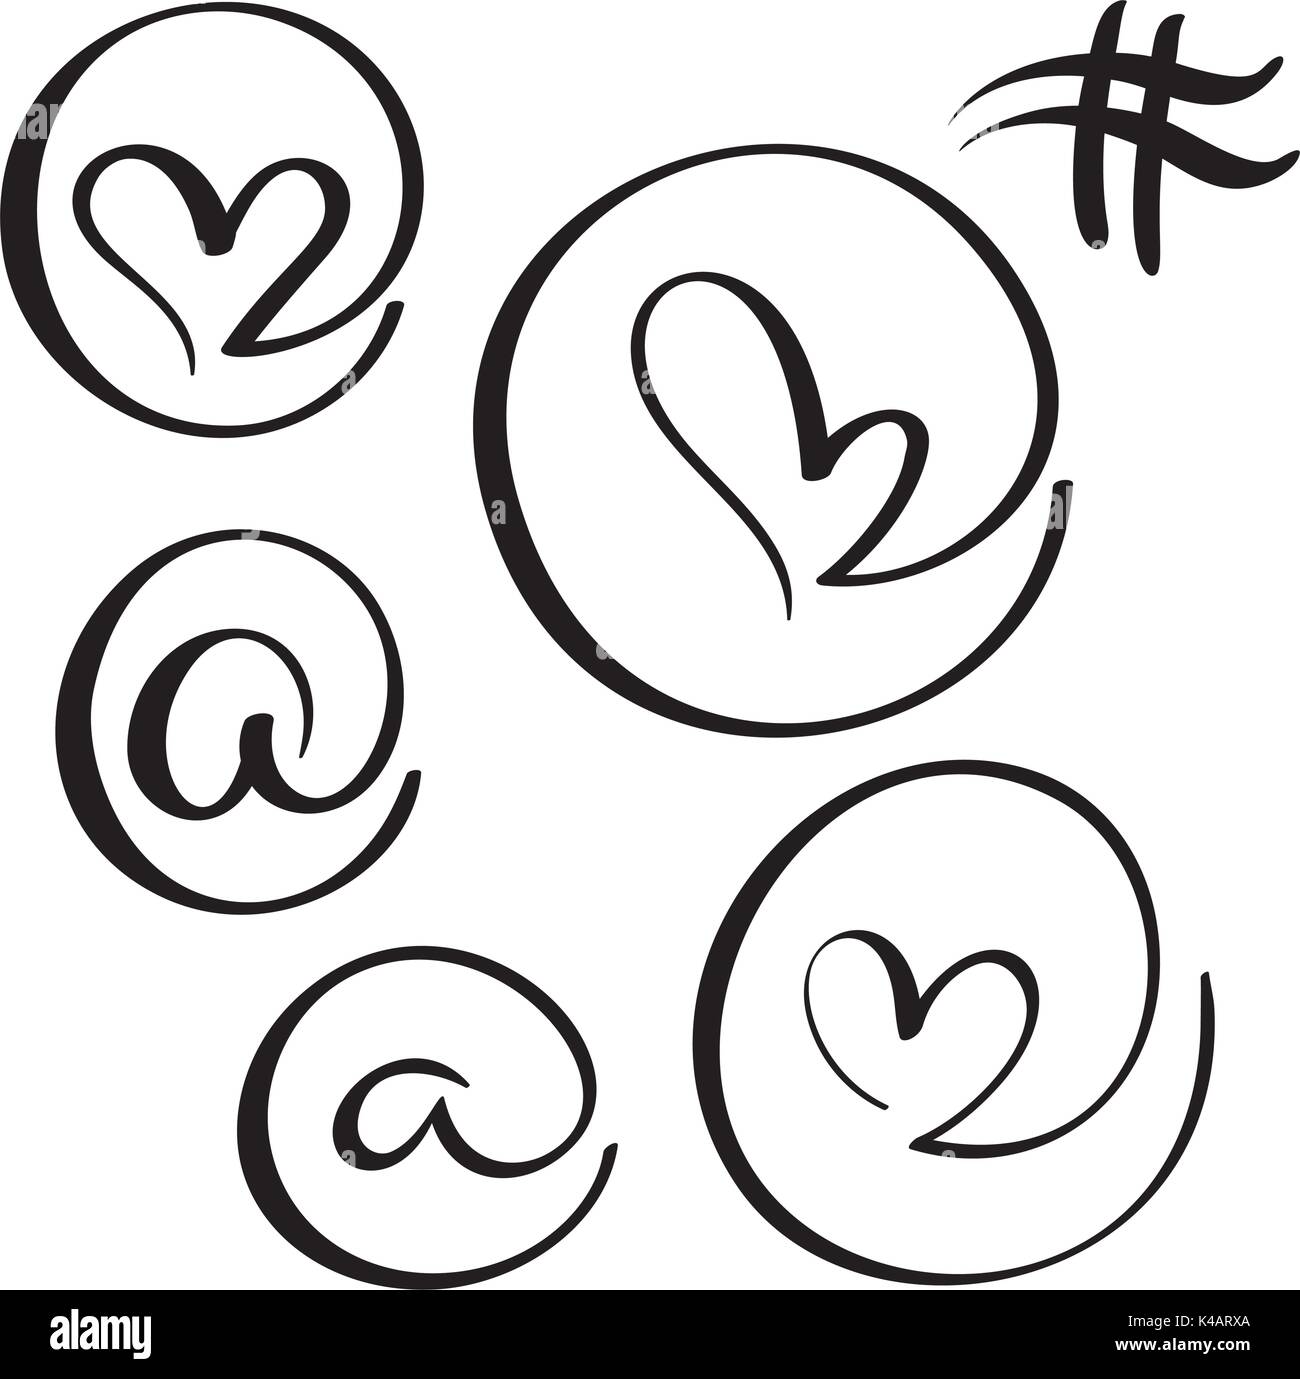 set of flourish calligraphy vintage at simbol in heart form. Illustration vector hand drawn EPS 10 Stock Vector